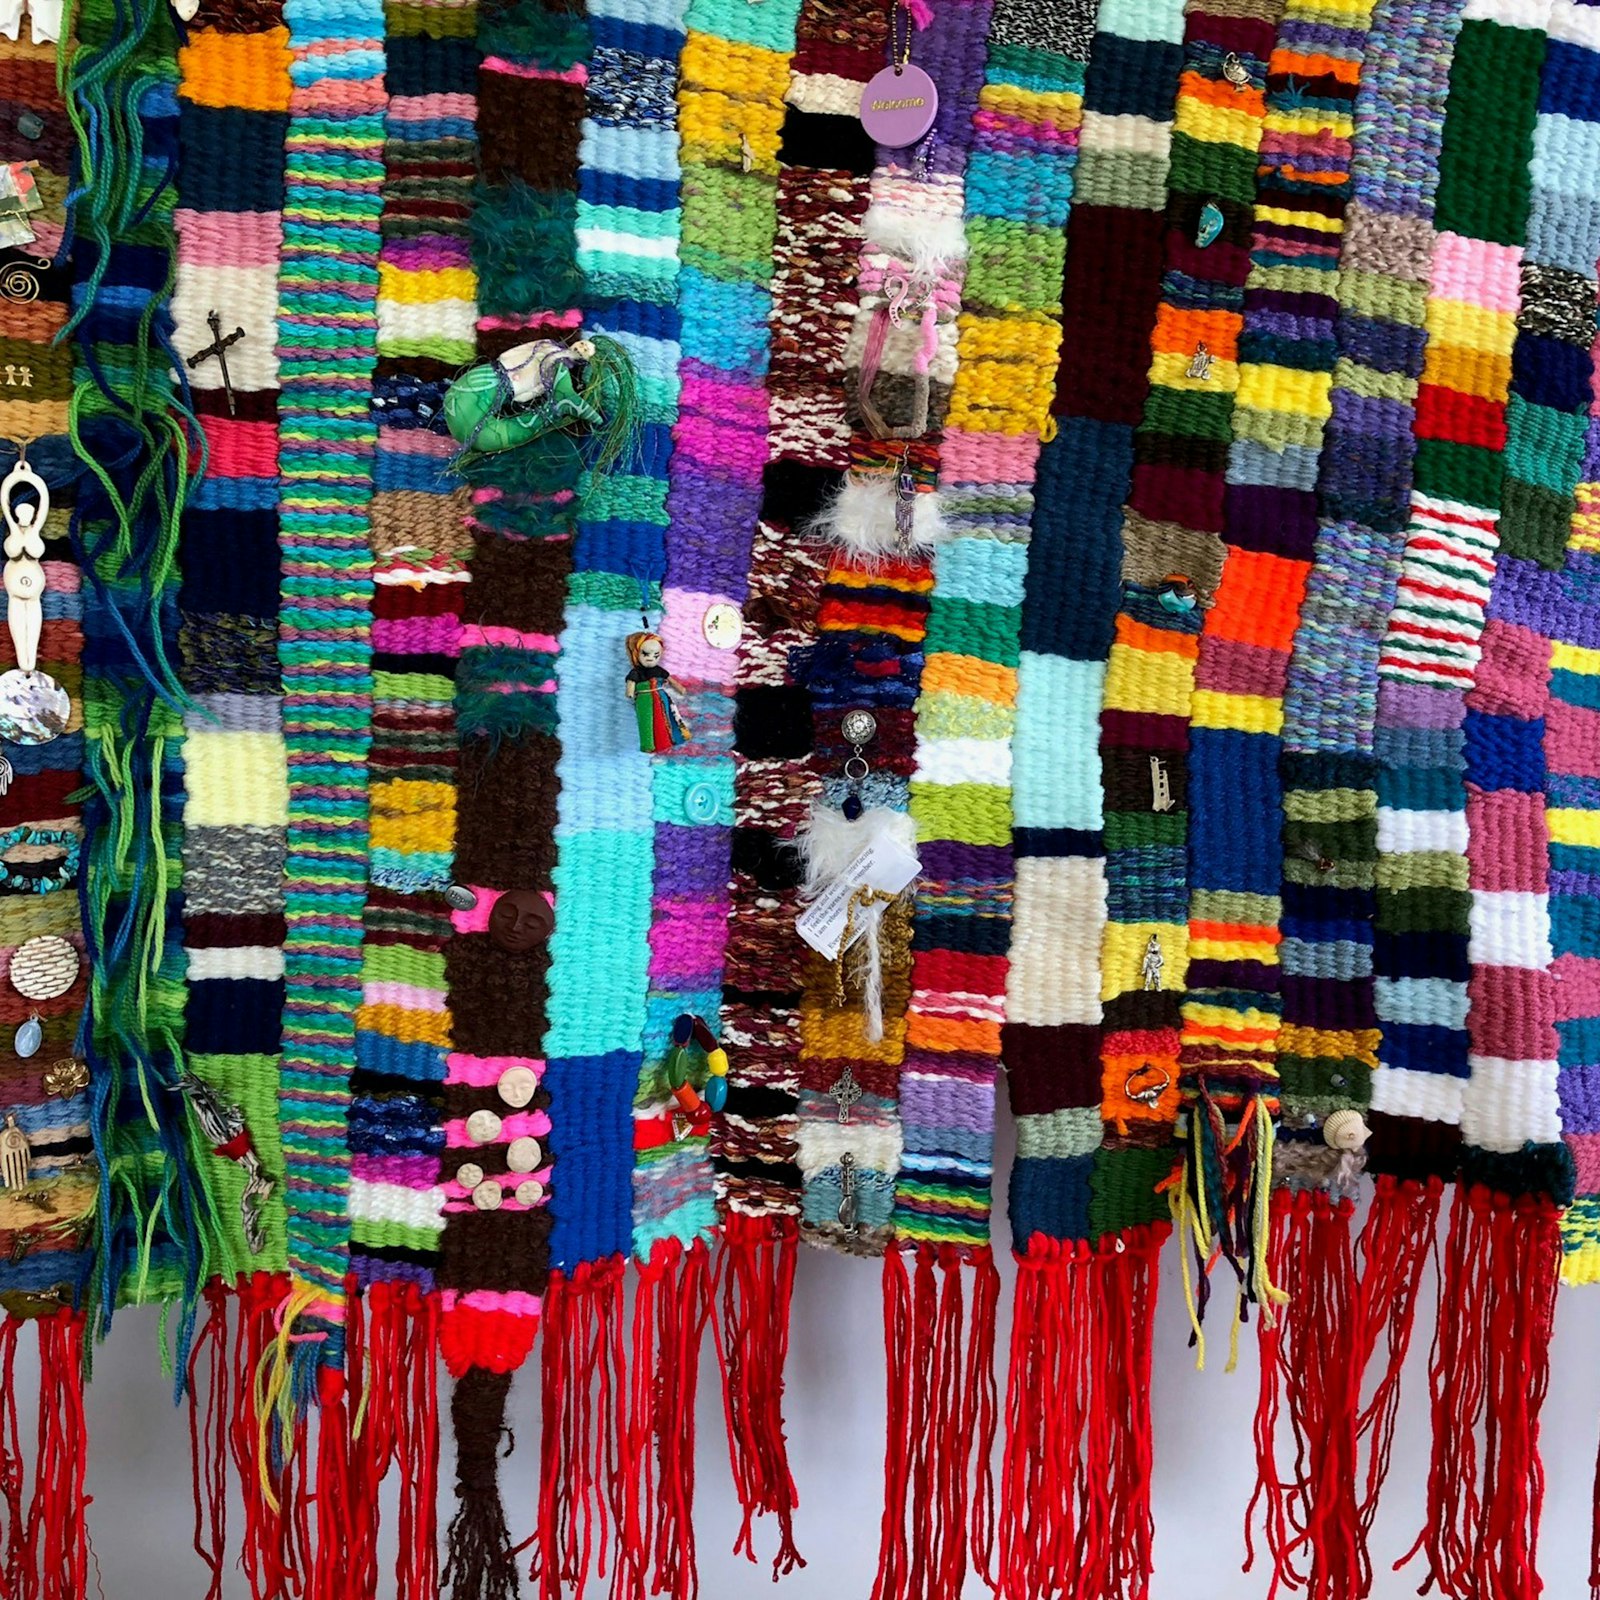 Women's Woven Voices—Fostering Creativity, Community, and